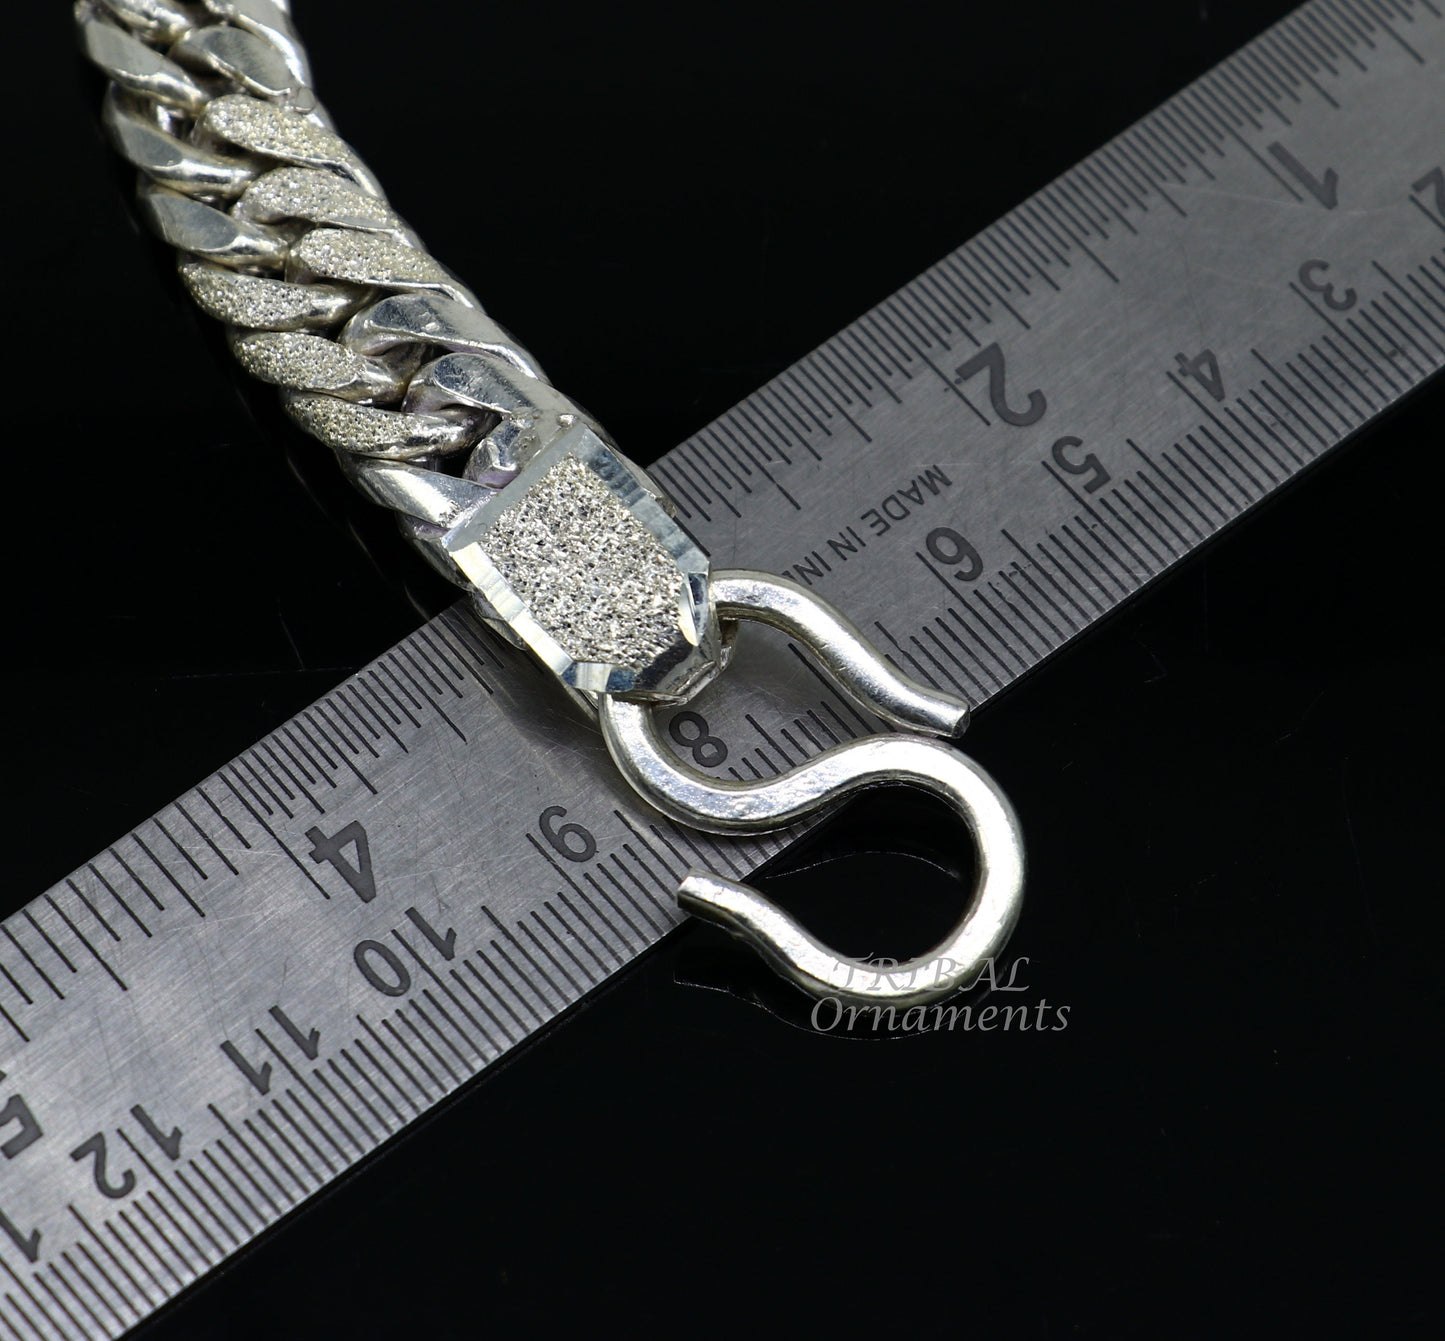 925 sterling silver handmade vintage design Custom Cuban curb link chain, solid heavy necklace chain for boy's men's gifting jewelry ch163 - TRIBAL ORNAMENTS